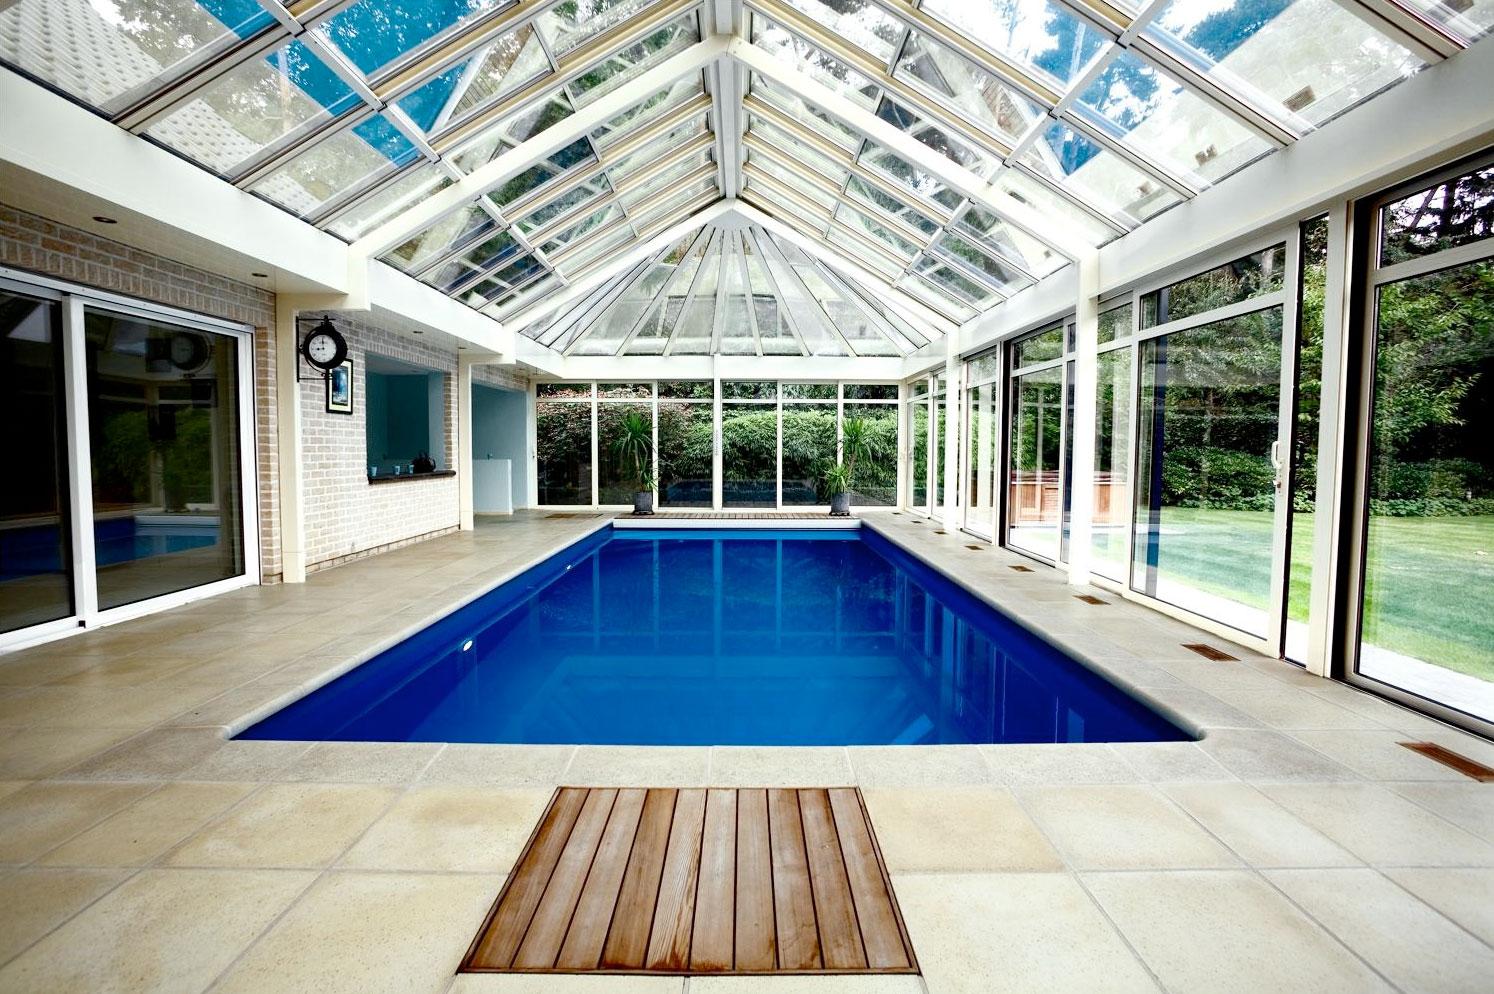 Creatice Indoor Home Pools for Large Space